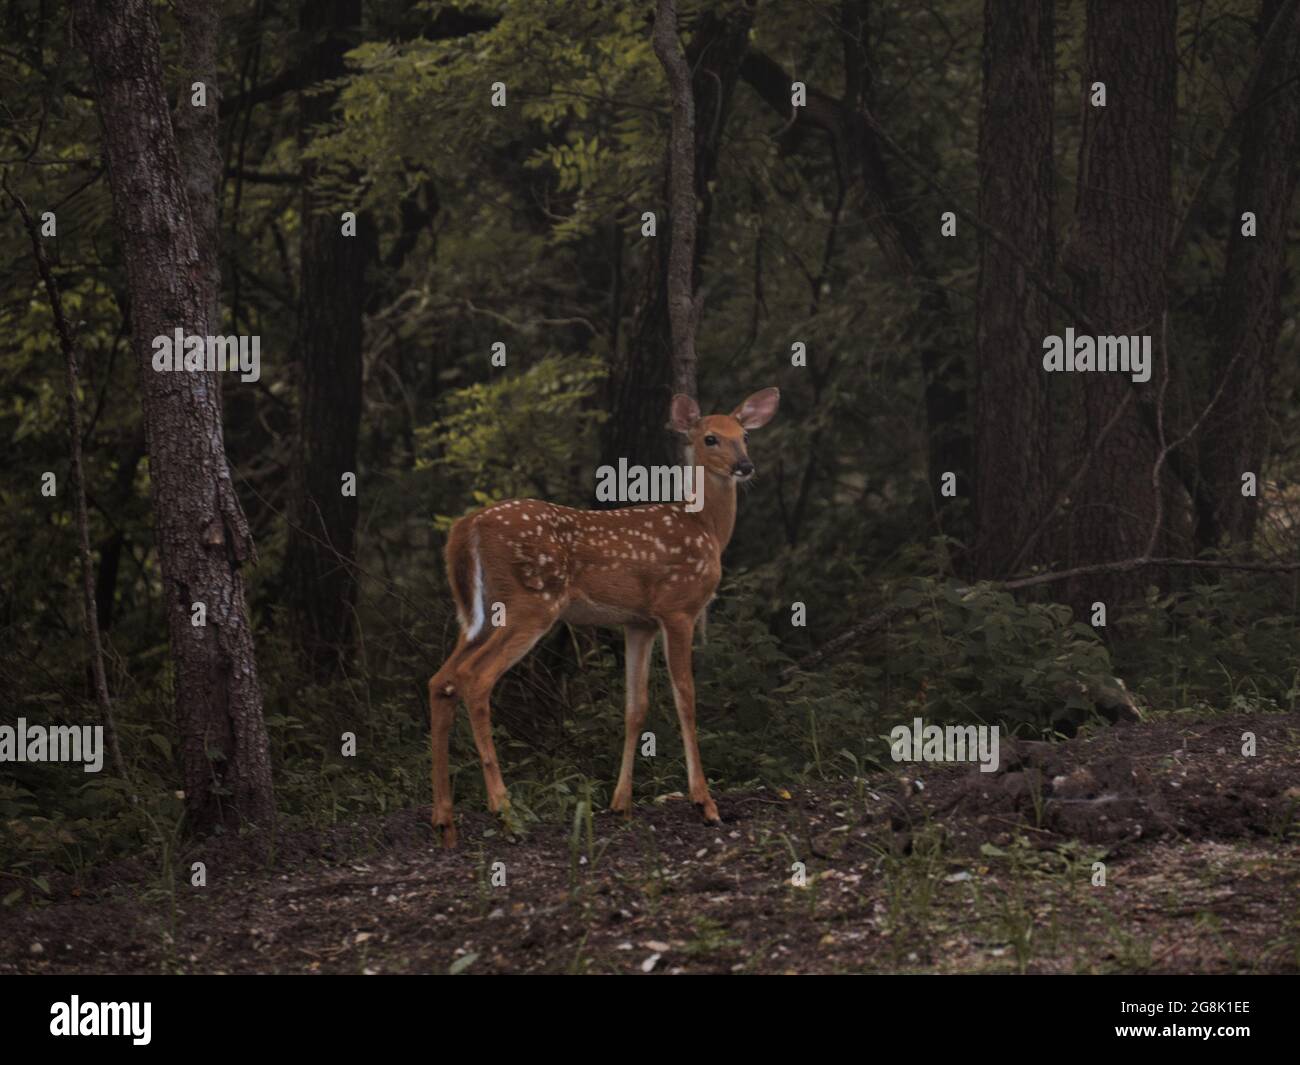 Young scared deer in a dark dense forest Stock Photo